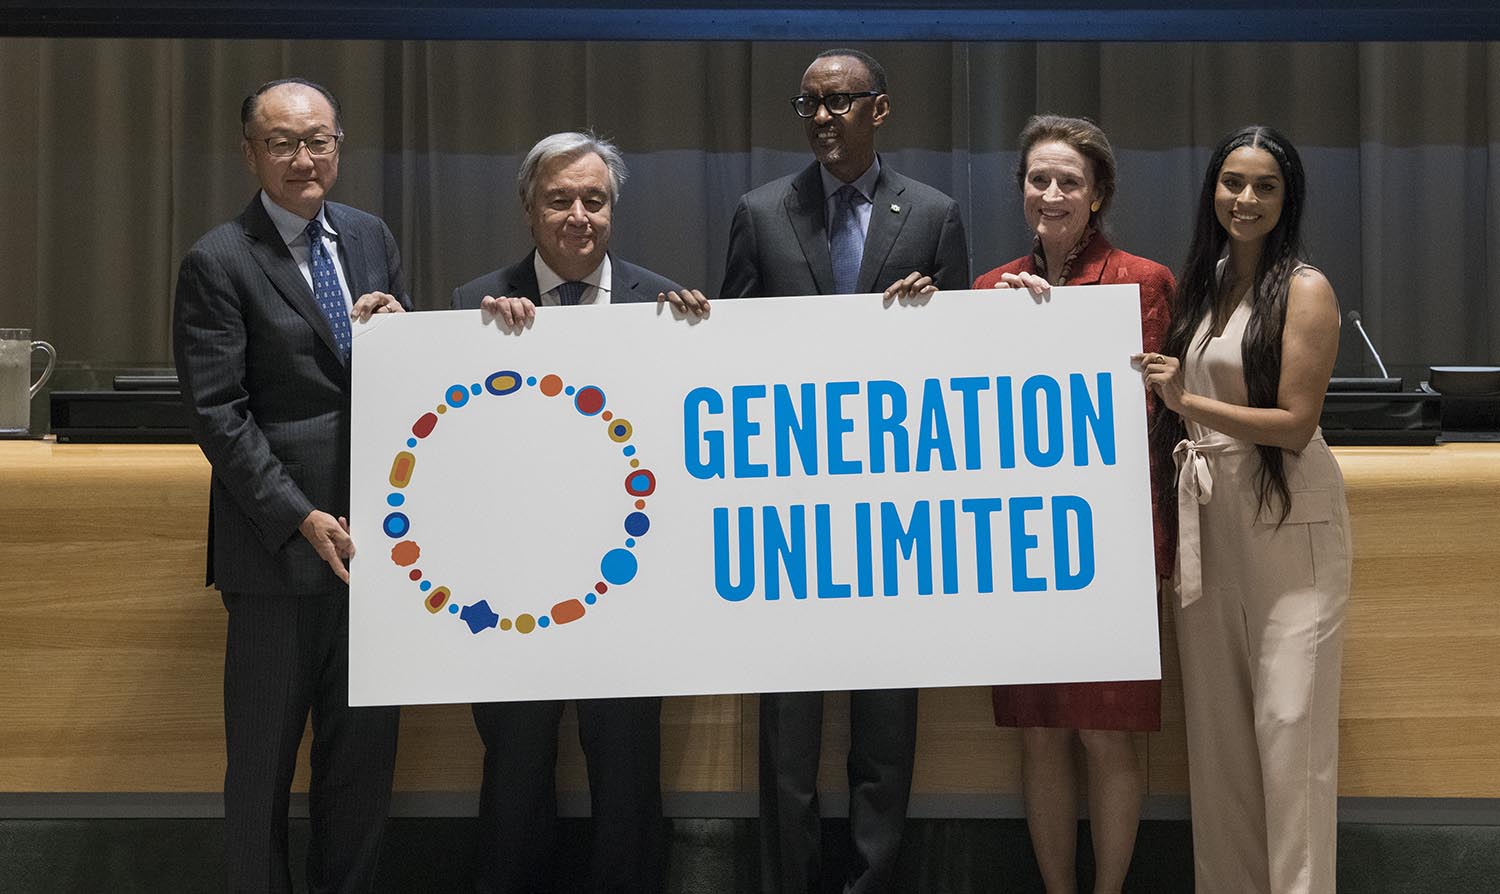 President Kagame with UN Secretary General Antu00f3nio Guterres (2nd left) and World Bank Group President Jim Yong Kim (left). Others are UNICEF Executive Director Henrietta Fore (2nd right) and Indian-Canadian actress, Lilly Singh, a UNICEF Goodwill Ambassador (right), during the launch of the Generation Unlimited initiative in New York yesterday. The initiative will champion youth empowerment across the globe. Village Urugwiro.